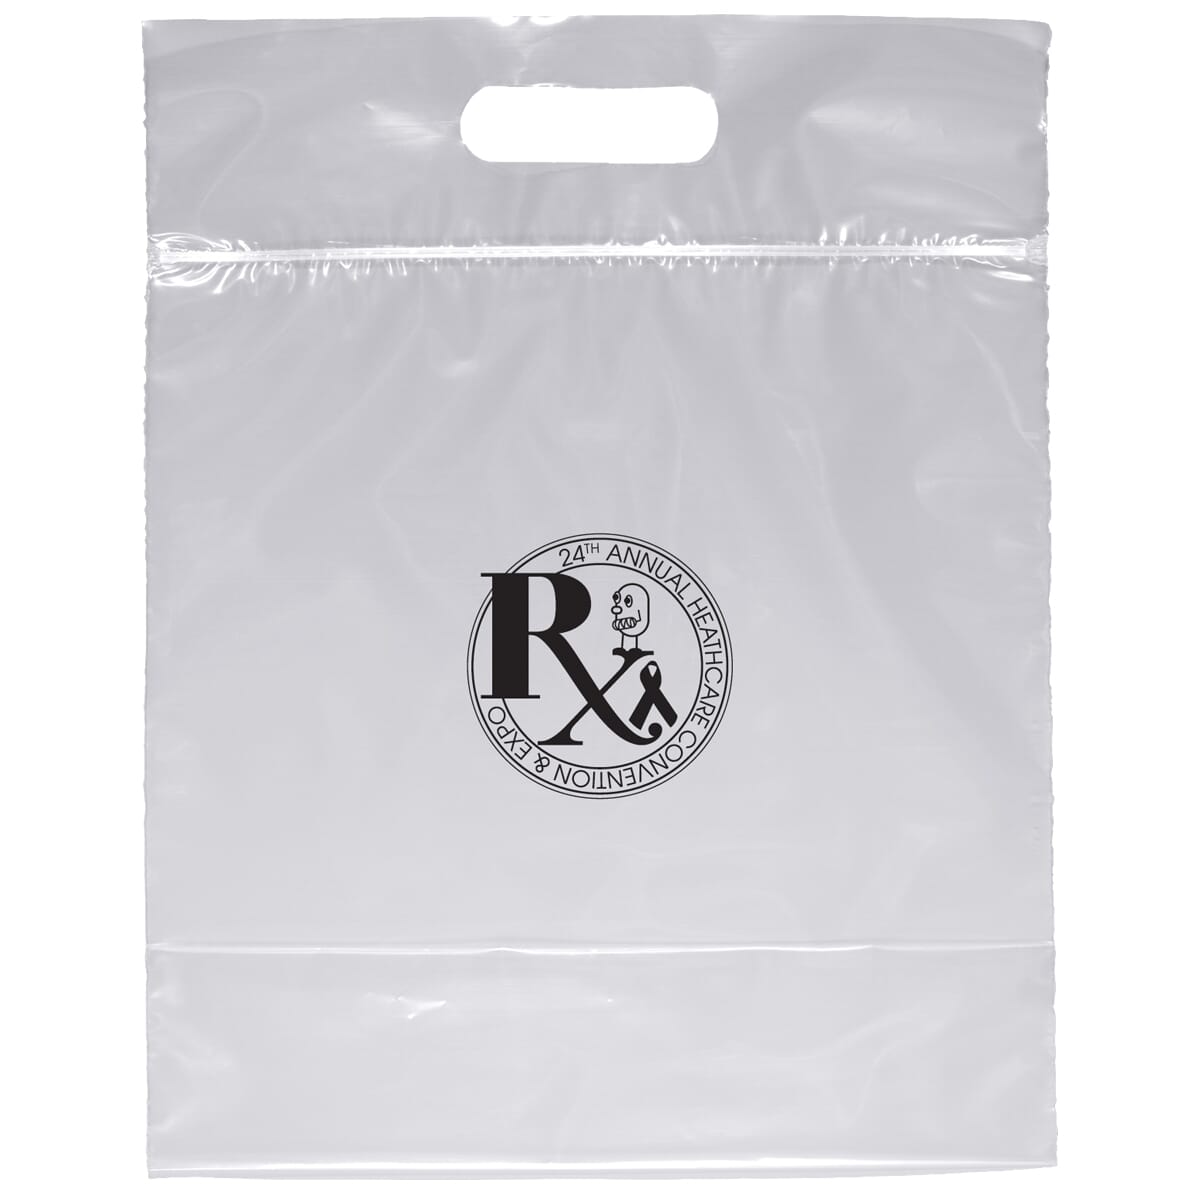 Clear Plastic Polythene Shopping Carrier Bags 10 x 12 Inch FREE FIRST CLASS POST 